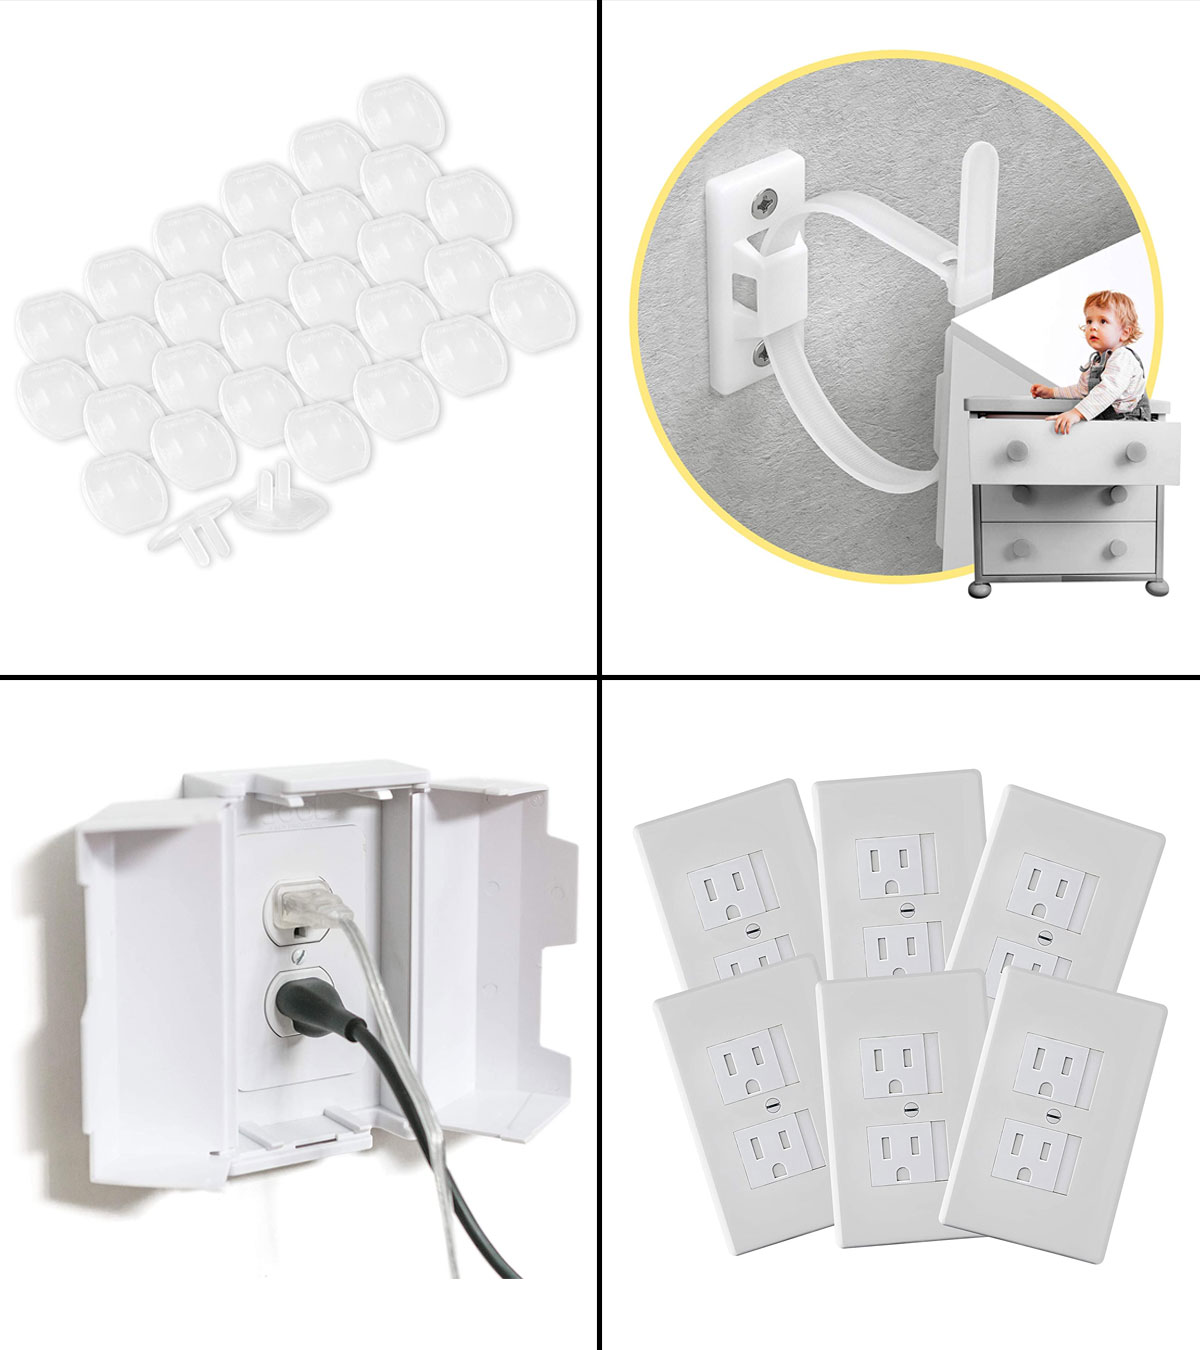 https://www.momjunction.com/wp-content/uploads/2021/09/f15-Best-Baby-Proofing-Products-For-Your-Home-In-2021.jpg